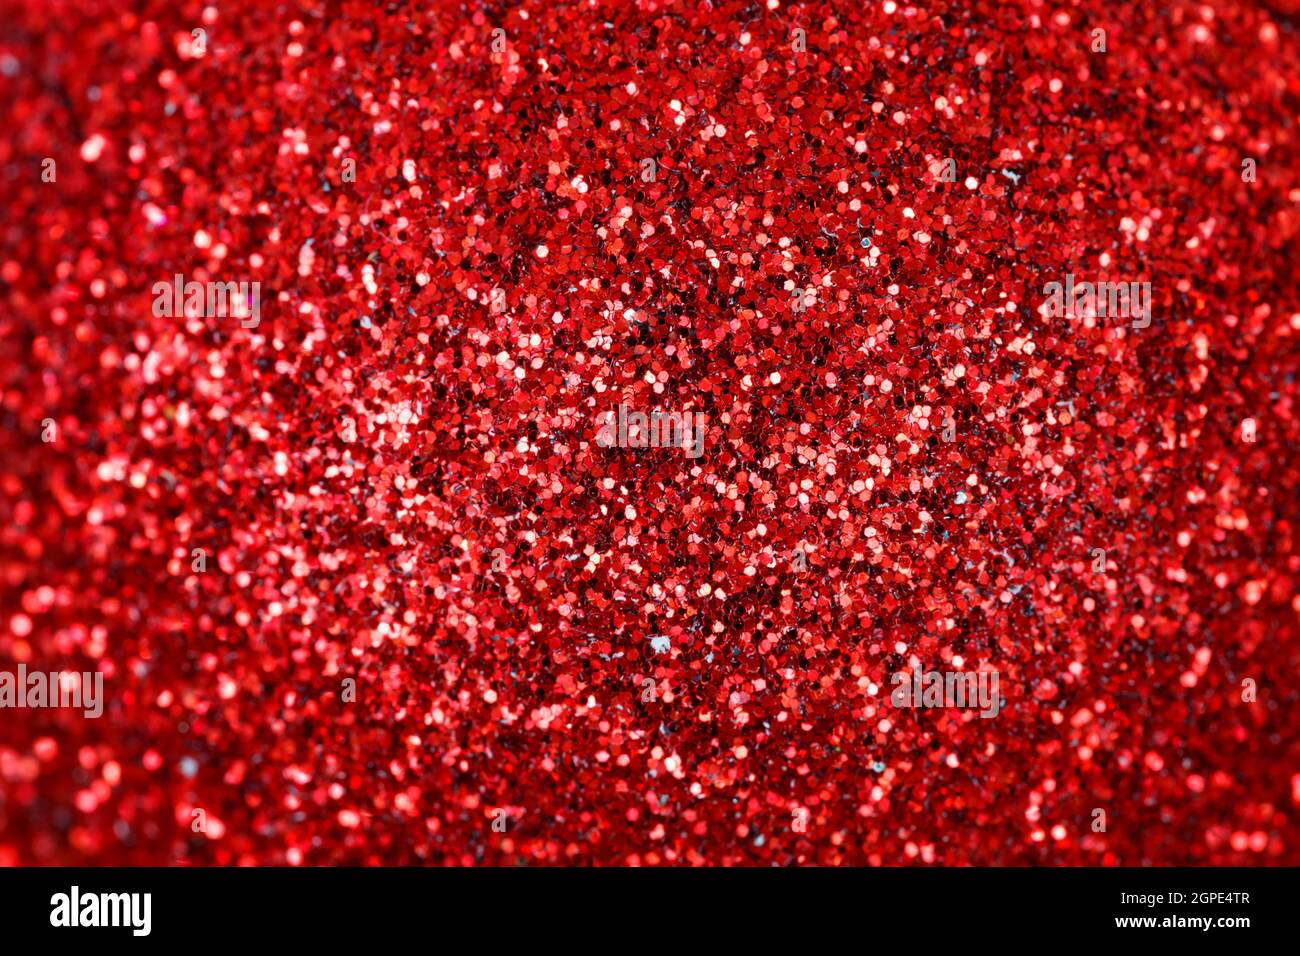 Red Christmas ball close-up. Shiny texture for wallpaper Stock Photo